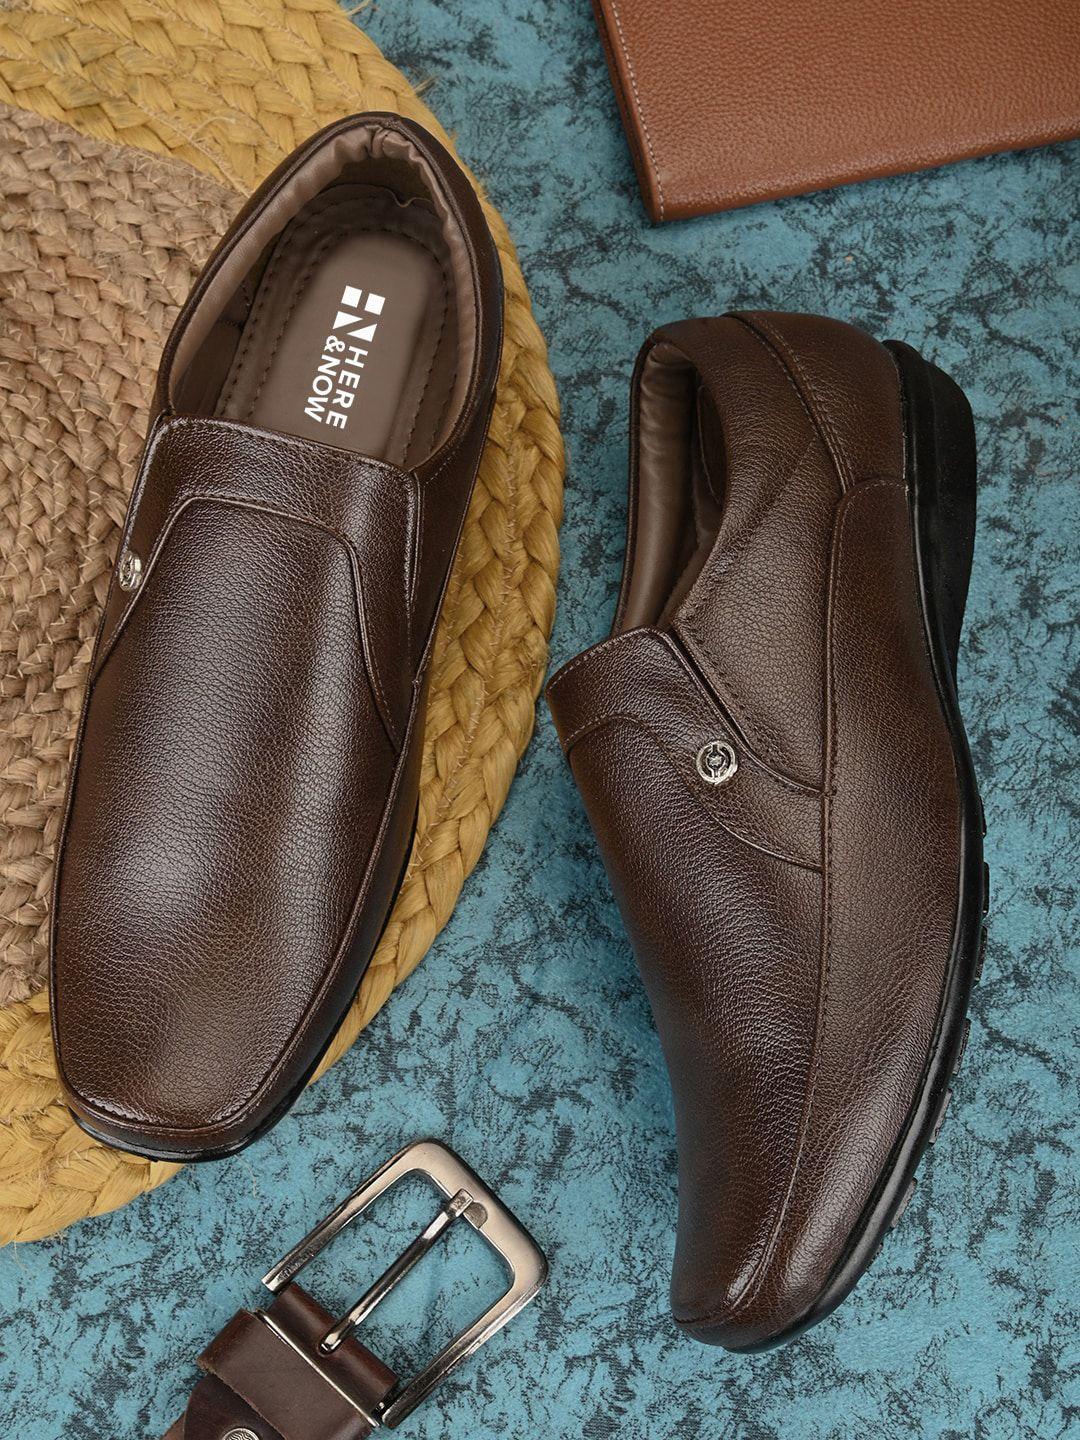 HERE&NOW Men Brown Slip-Ons Loafers Formal Shoes